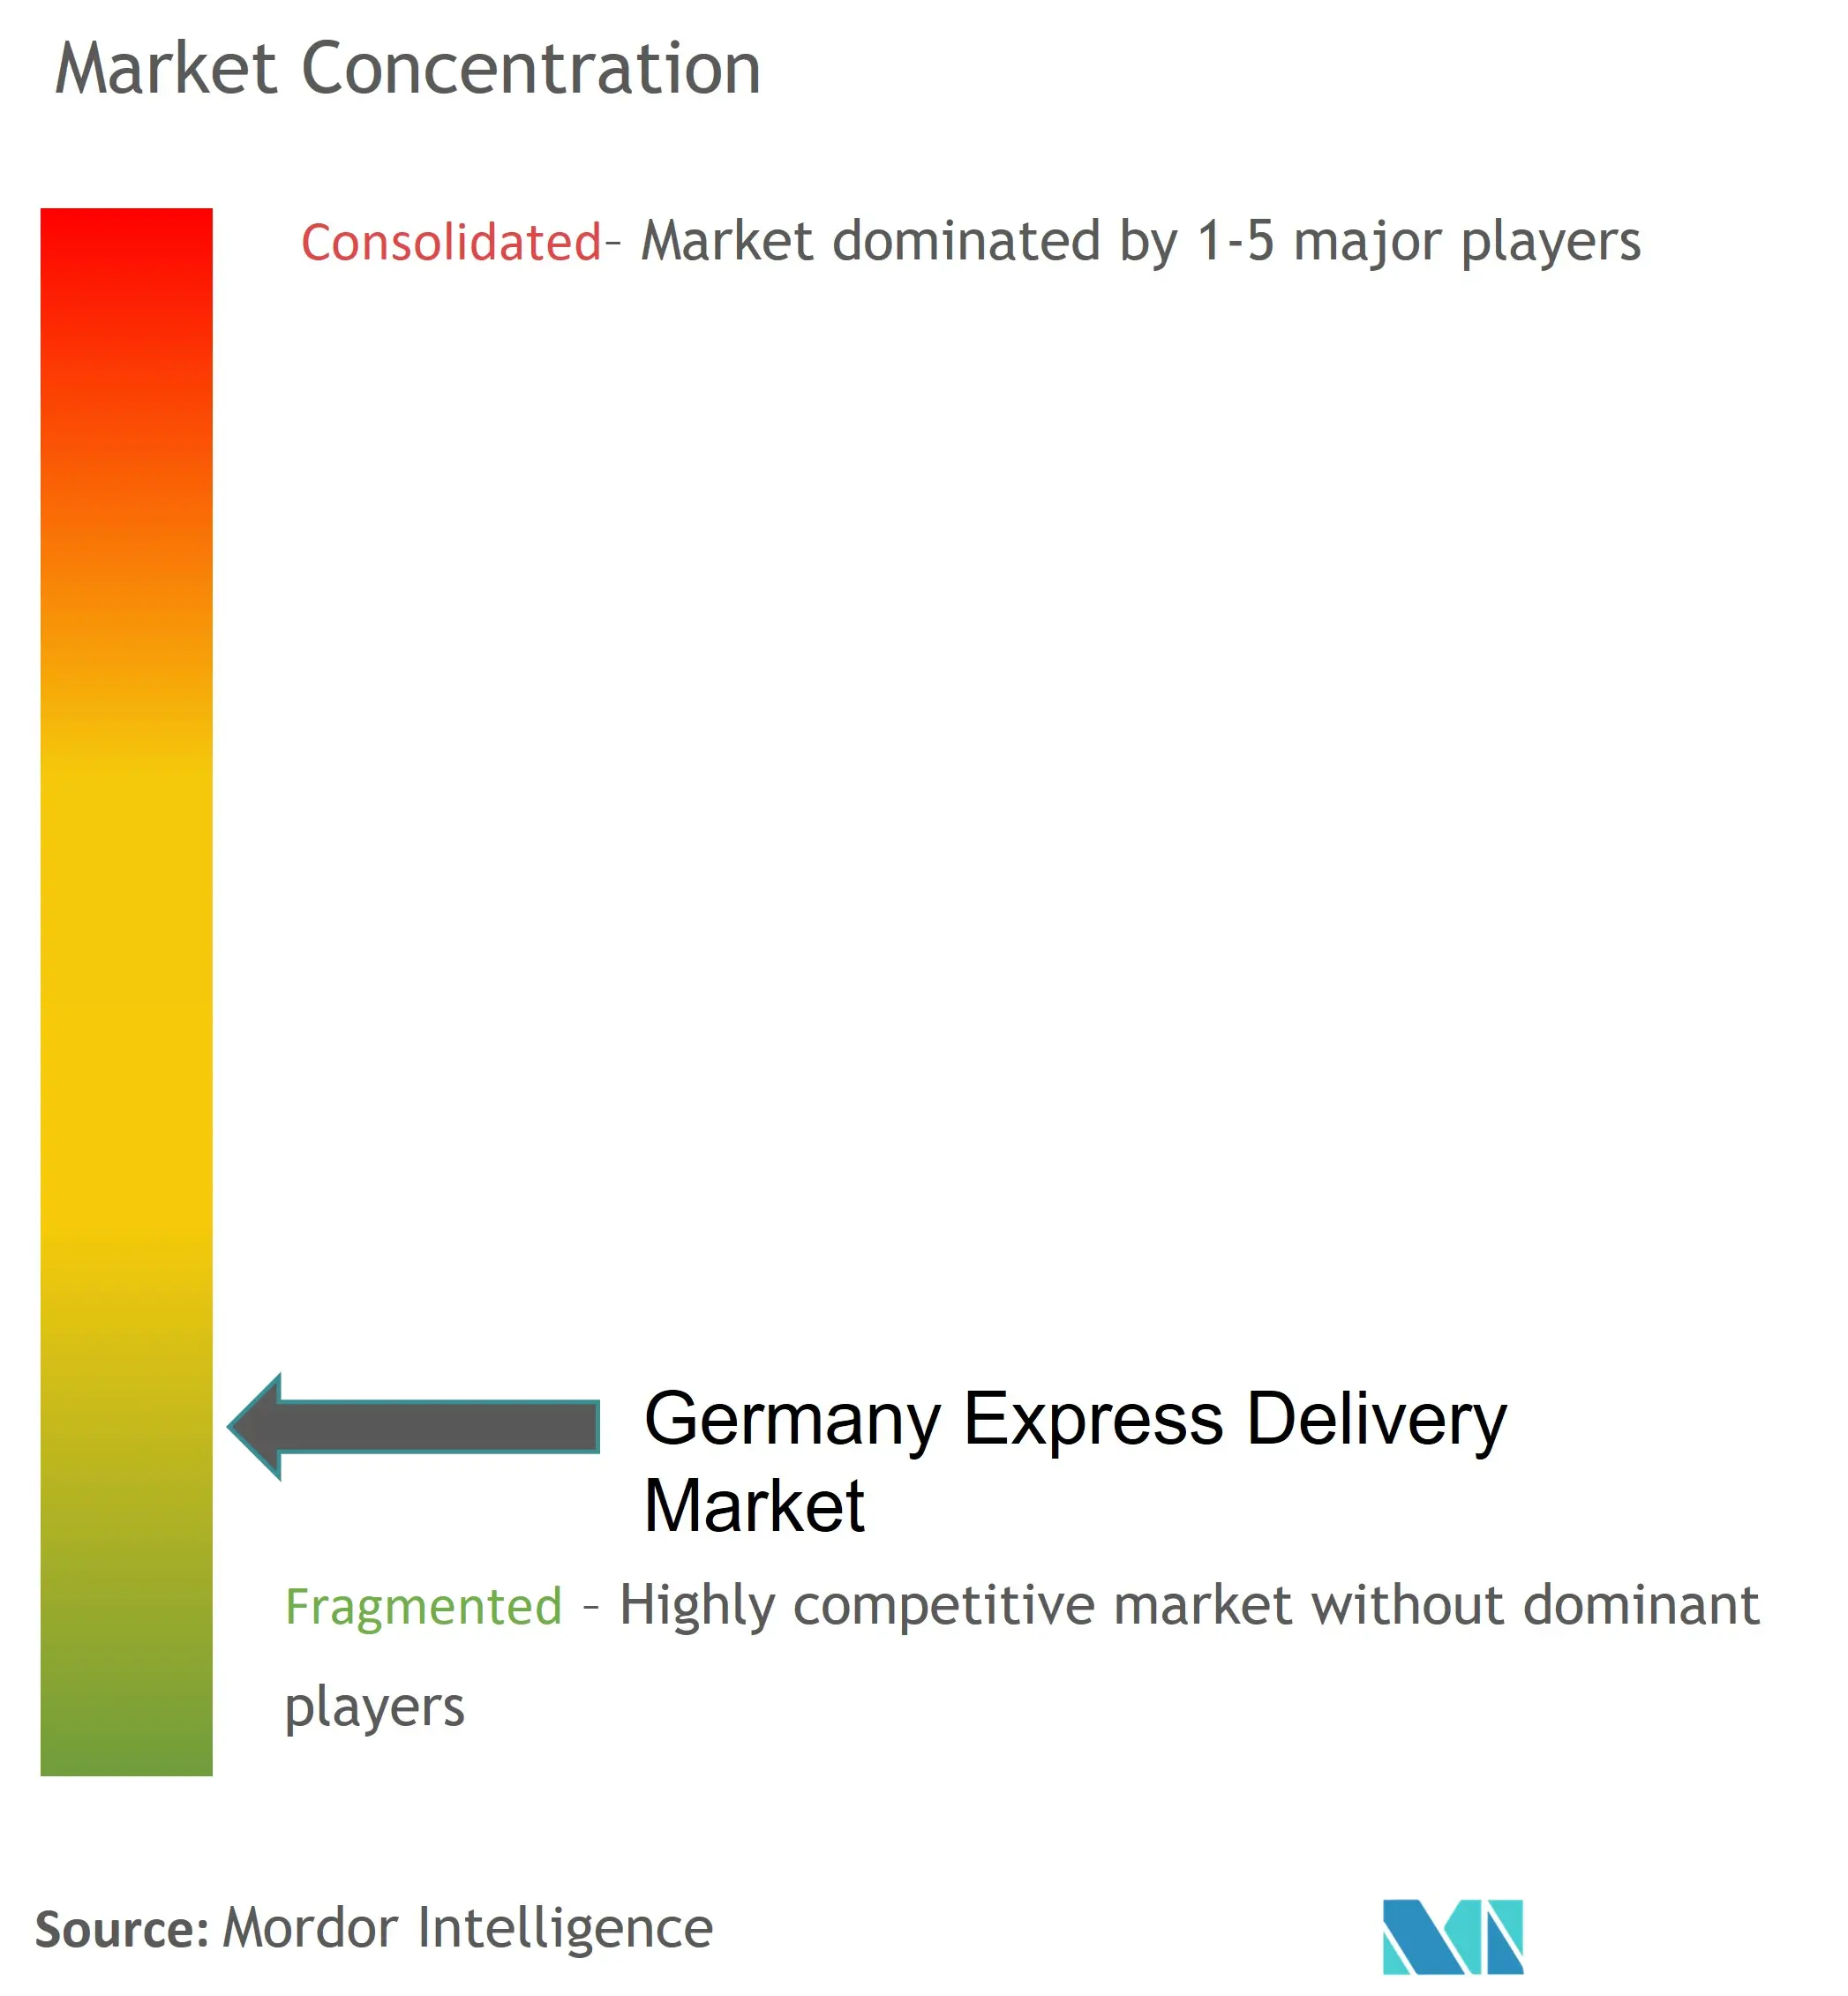 Germany Express Delivery Market Concentration